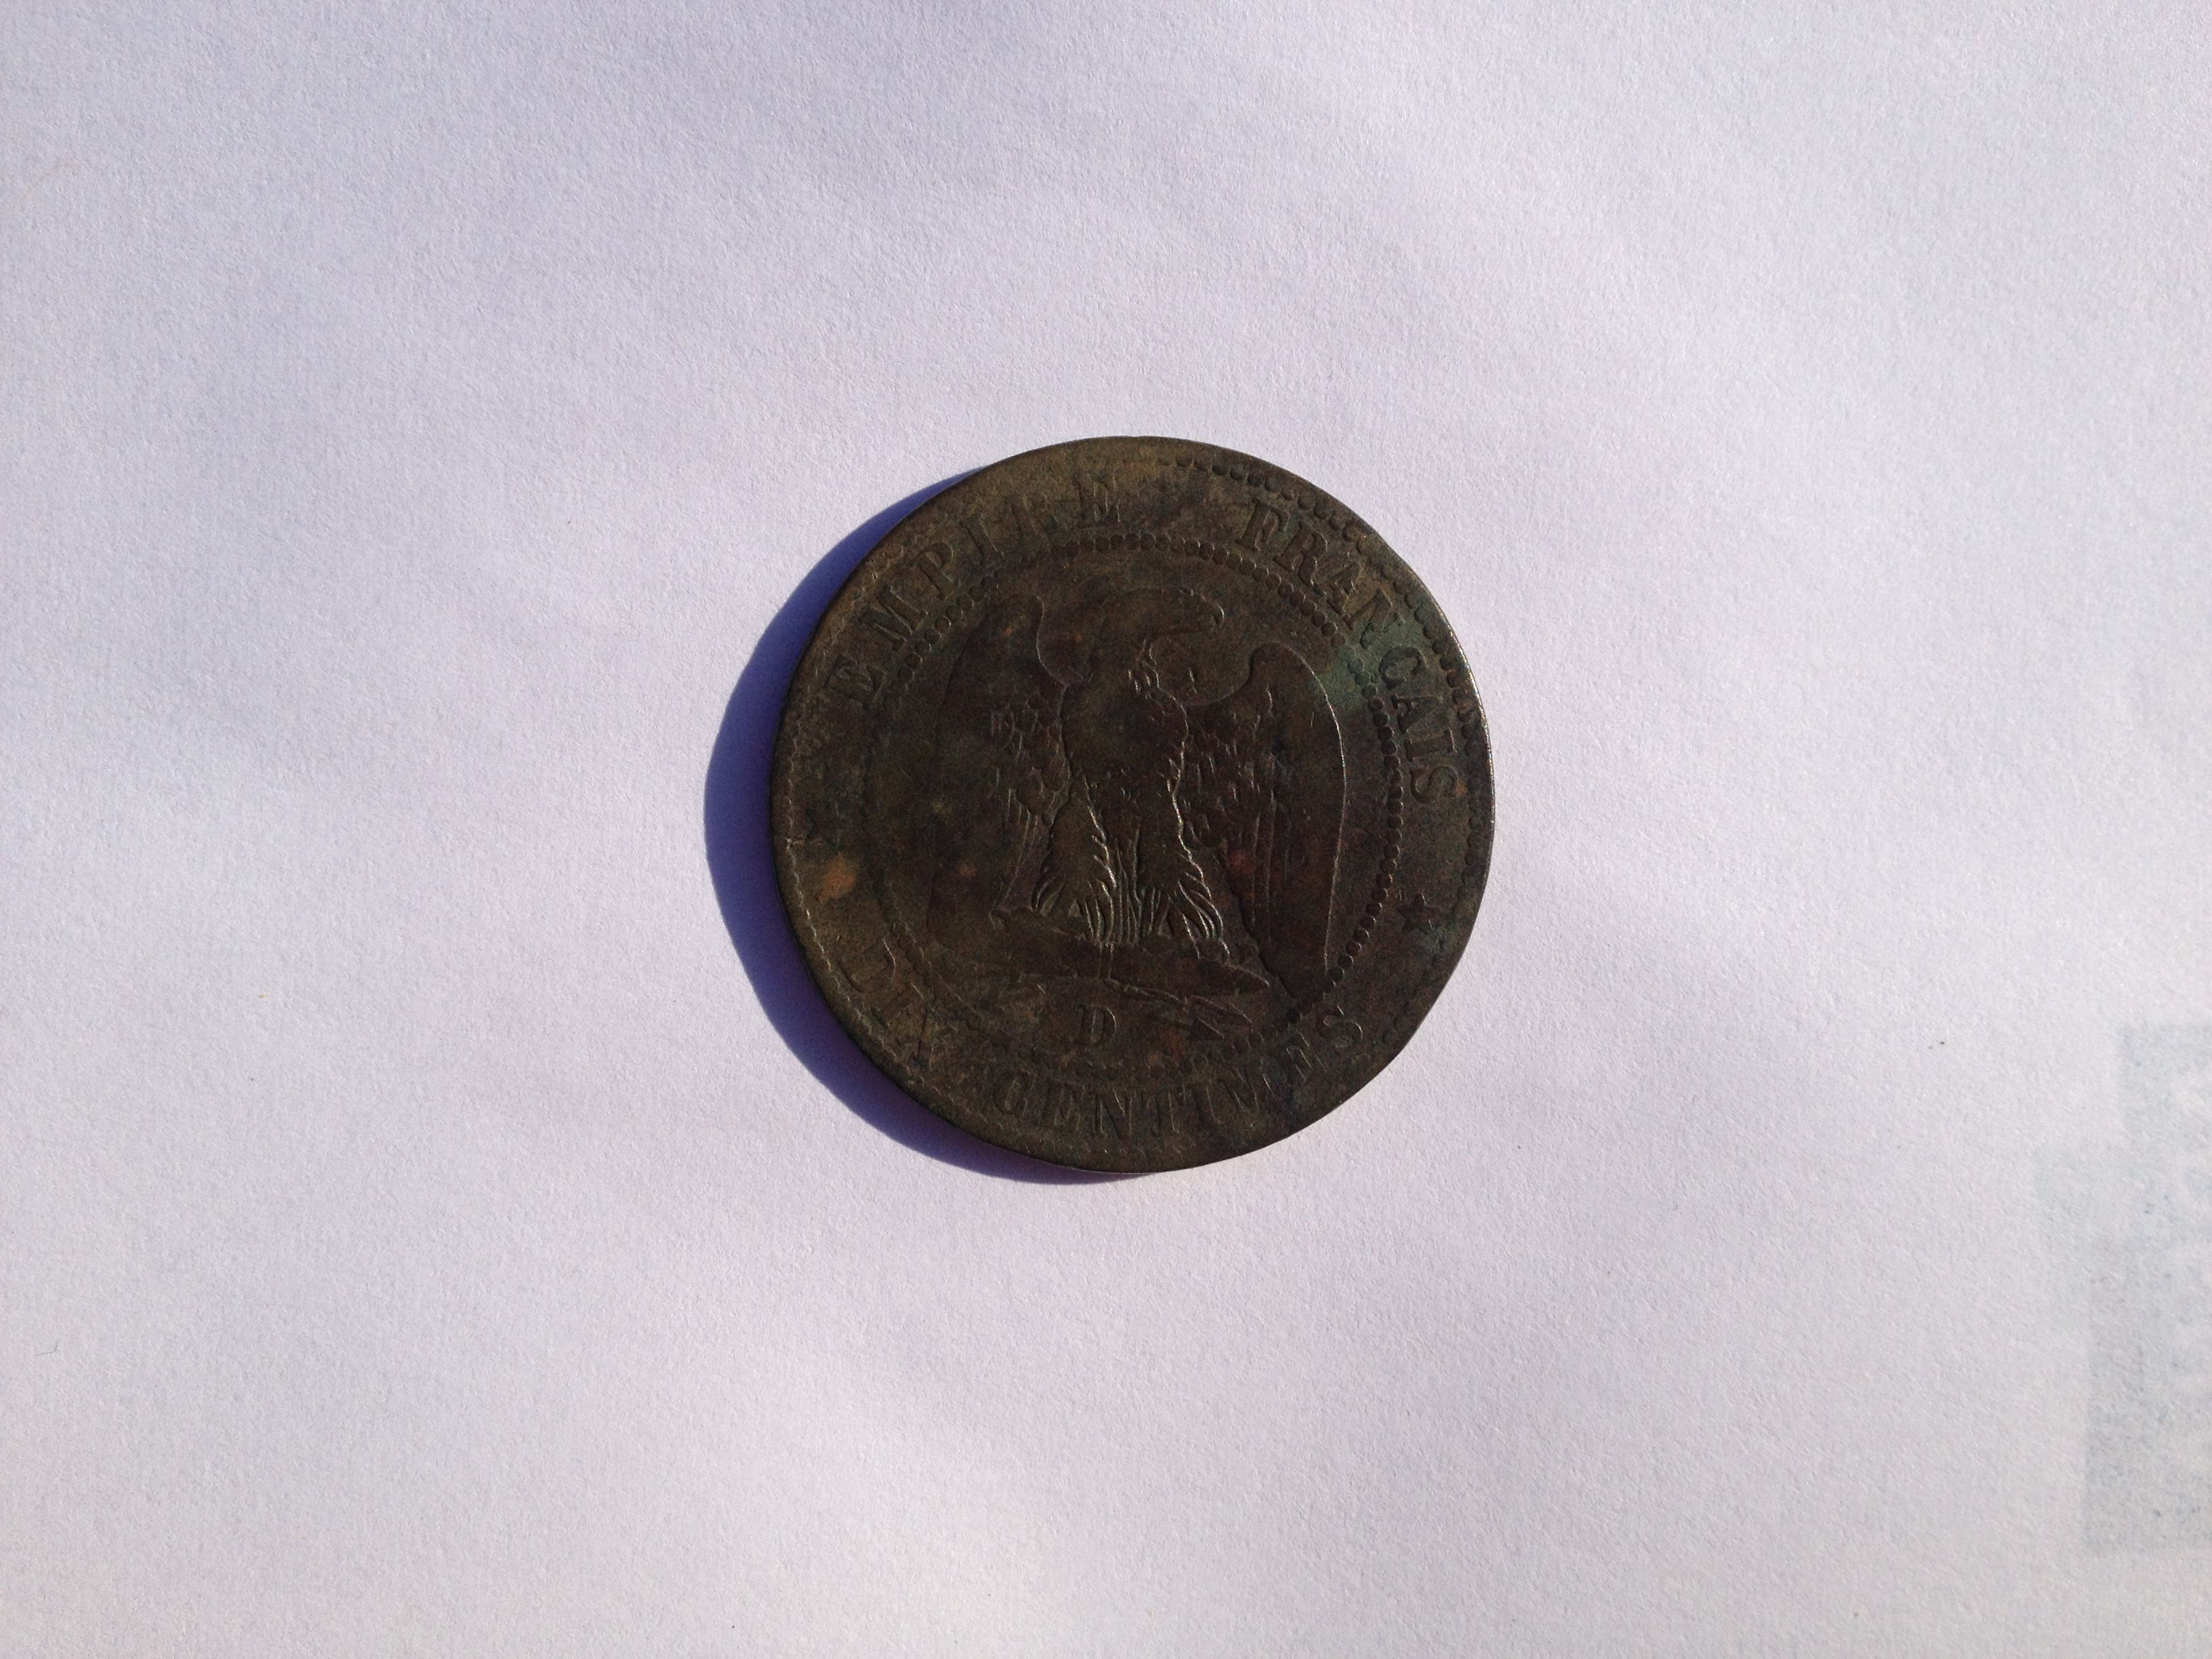 1855 French Dix centimes